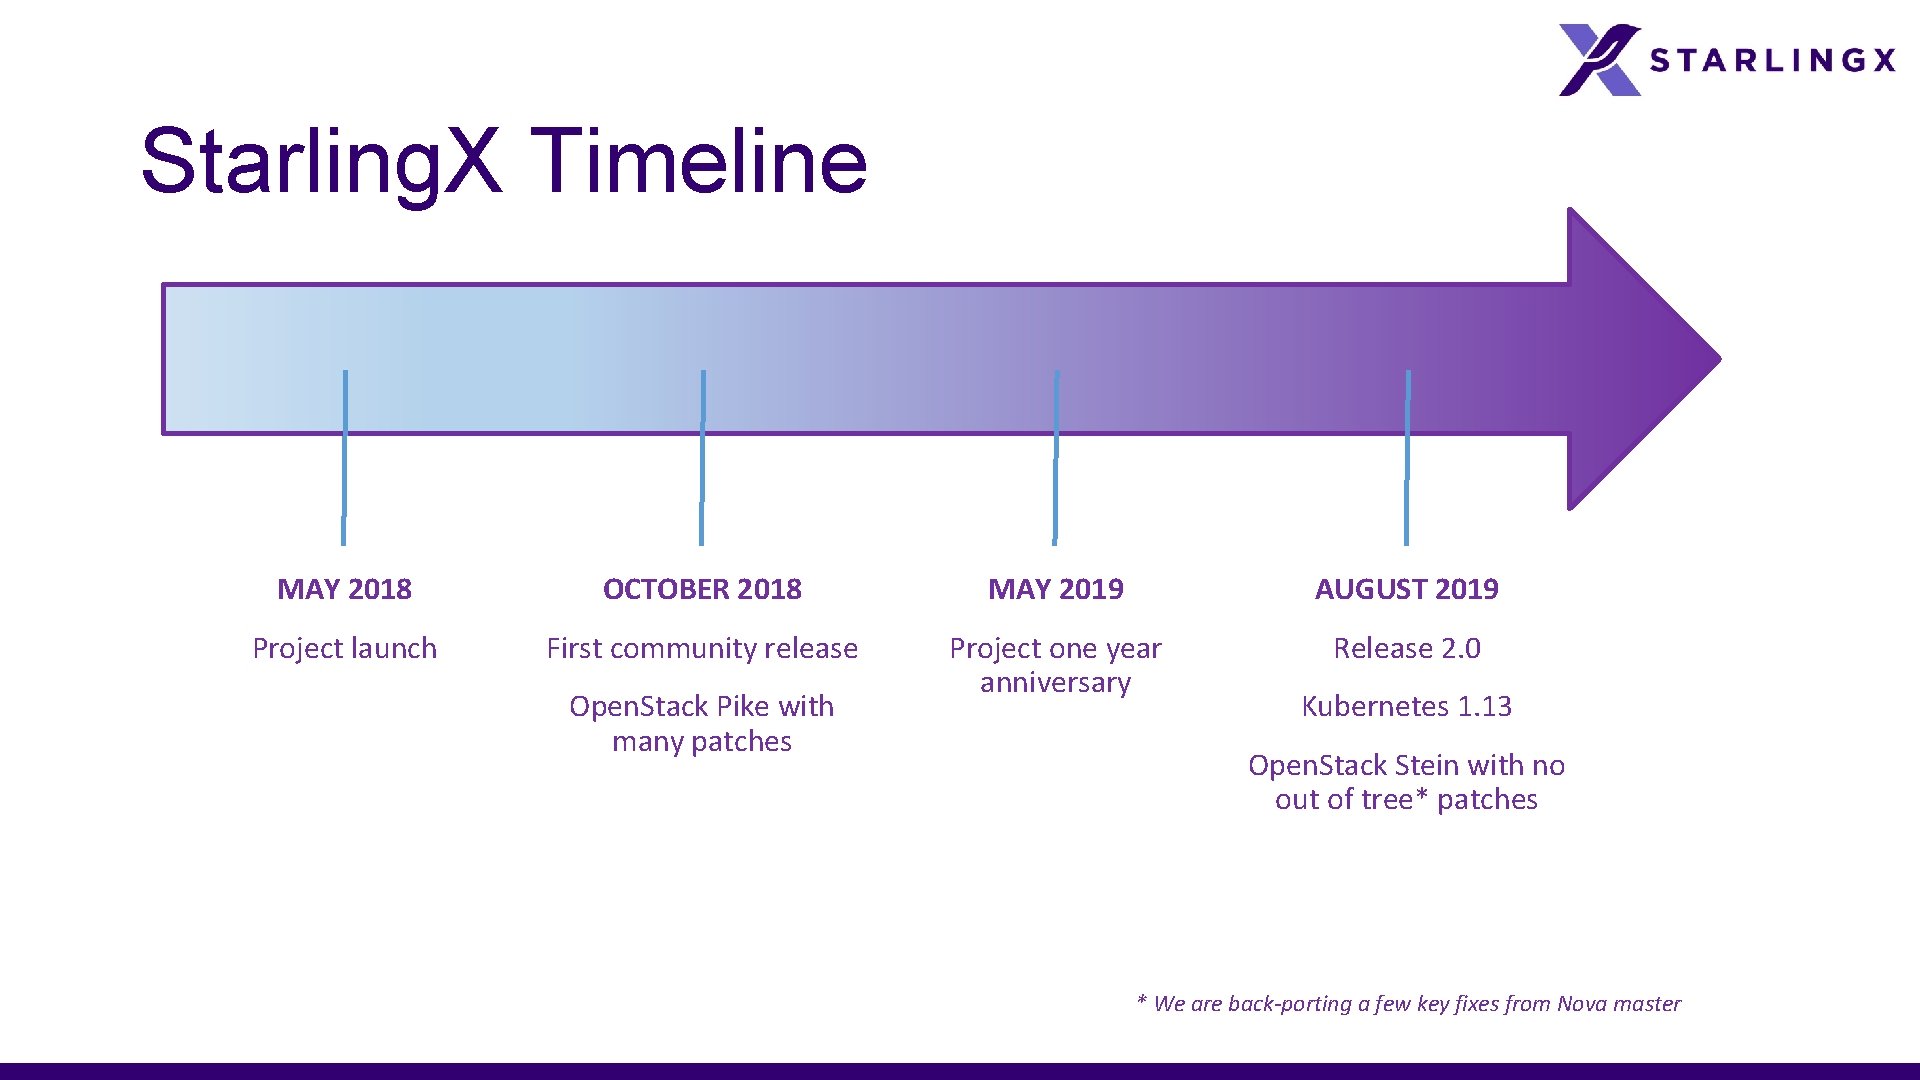 Starling. X Timeline MAY 2018 OCTOBER 2018 MAY 2019 AUGUST 2019 Project launch First